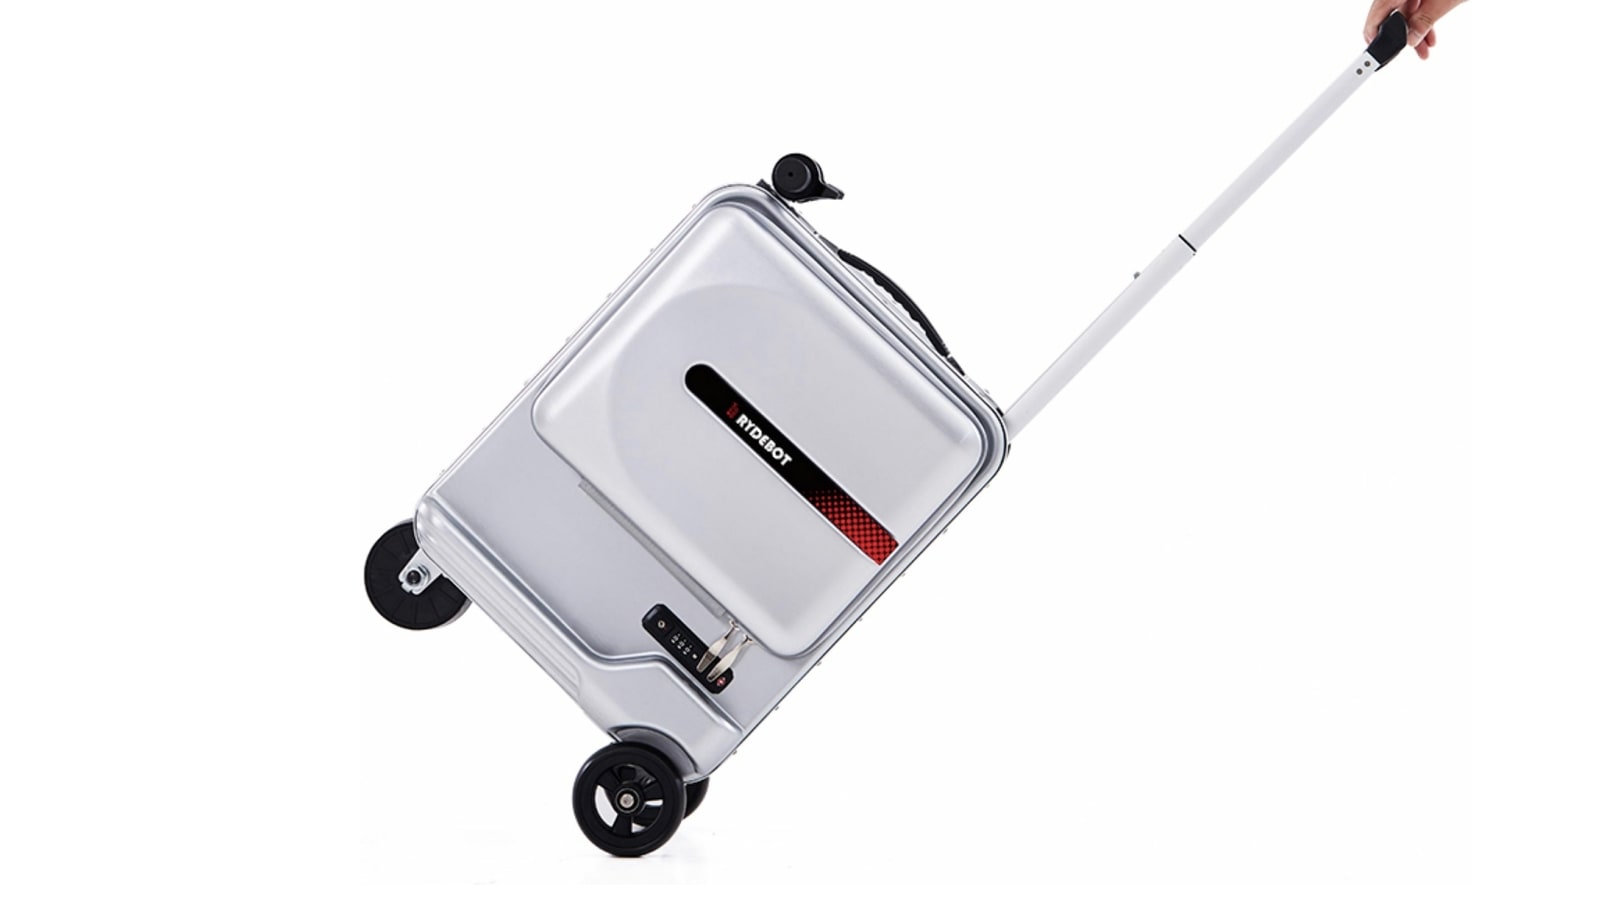 The Rydebot Smart Suitcase Series